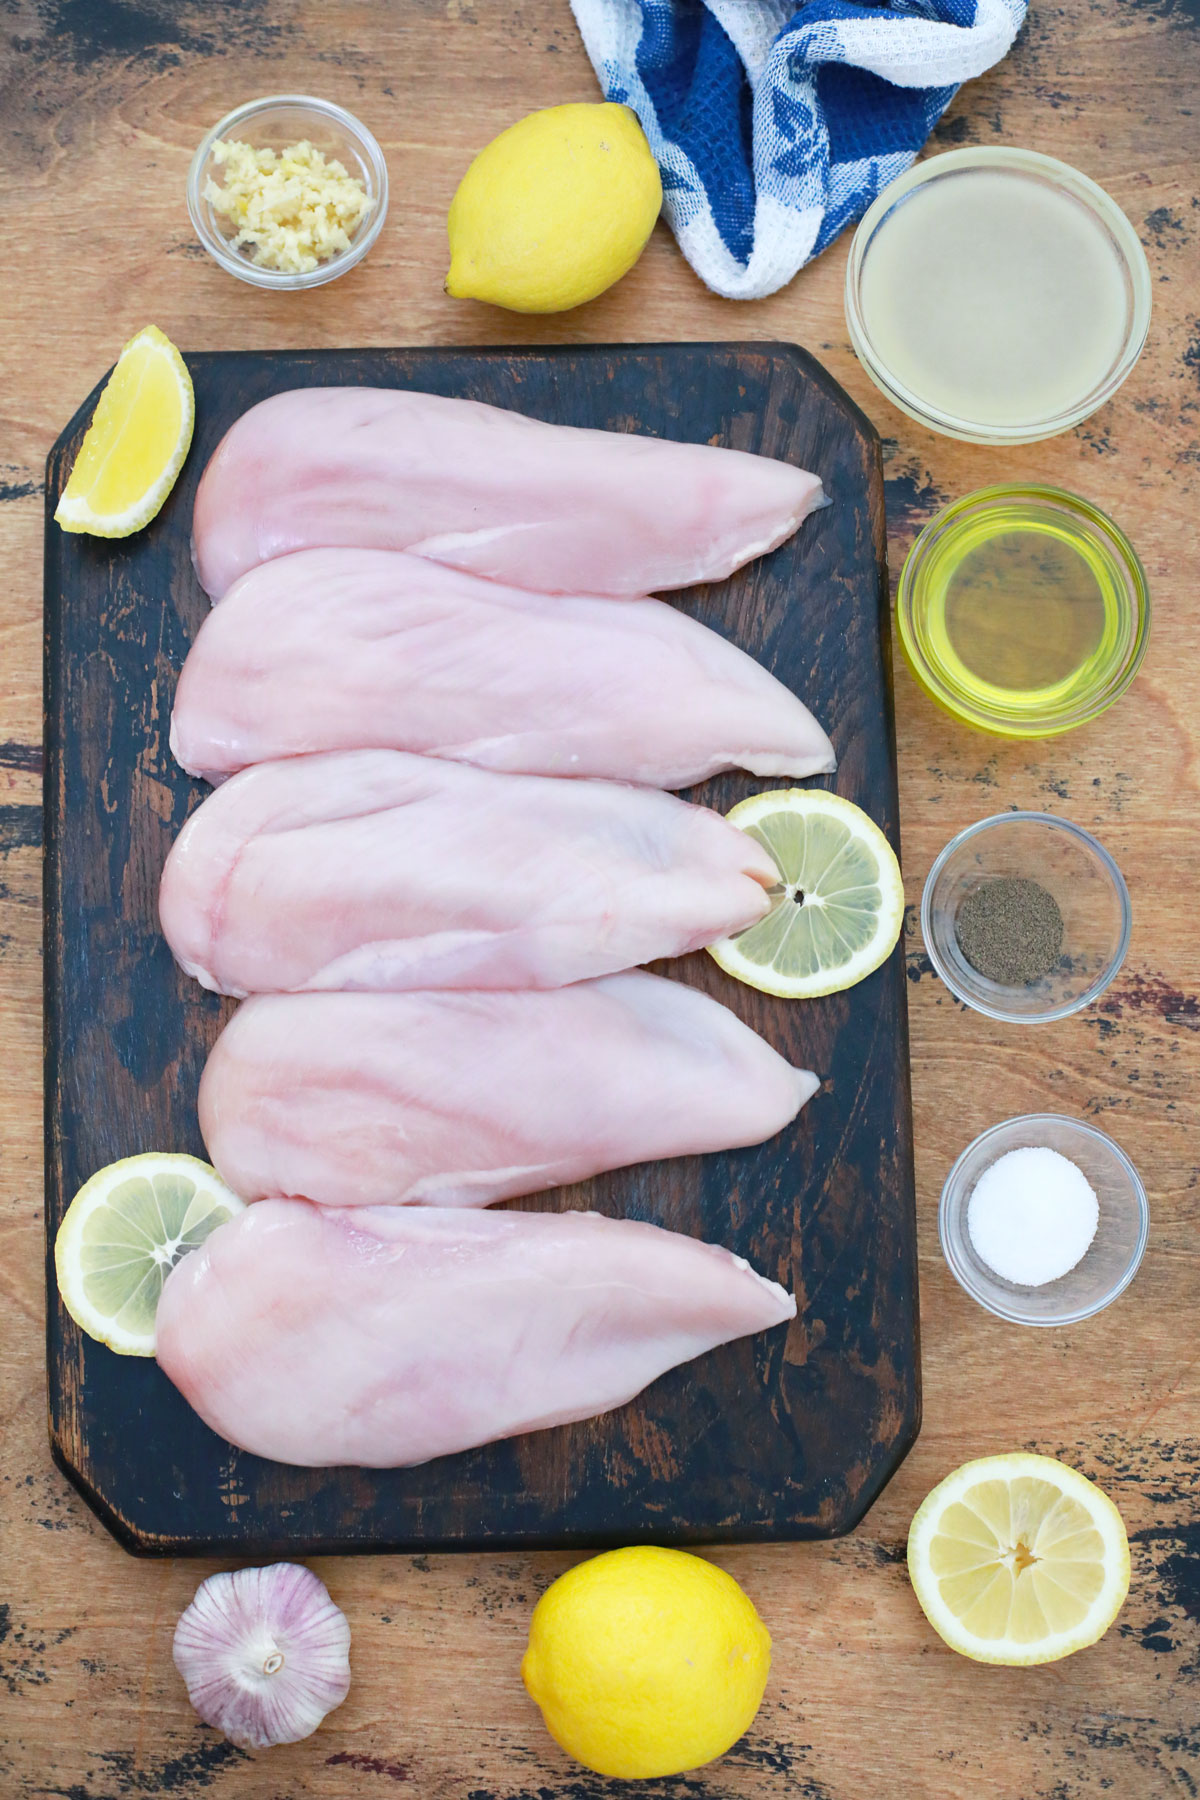 Ingredients for gluten-free chicken marinade including plate with raw chicken, lemon wedges and small bowls with oil salt and pepper